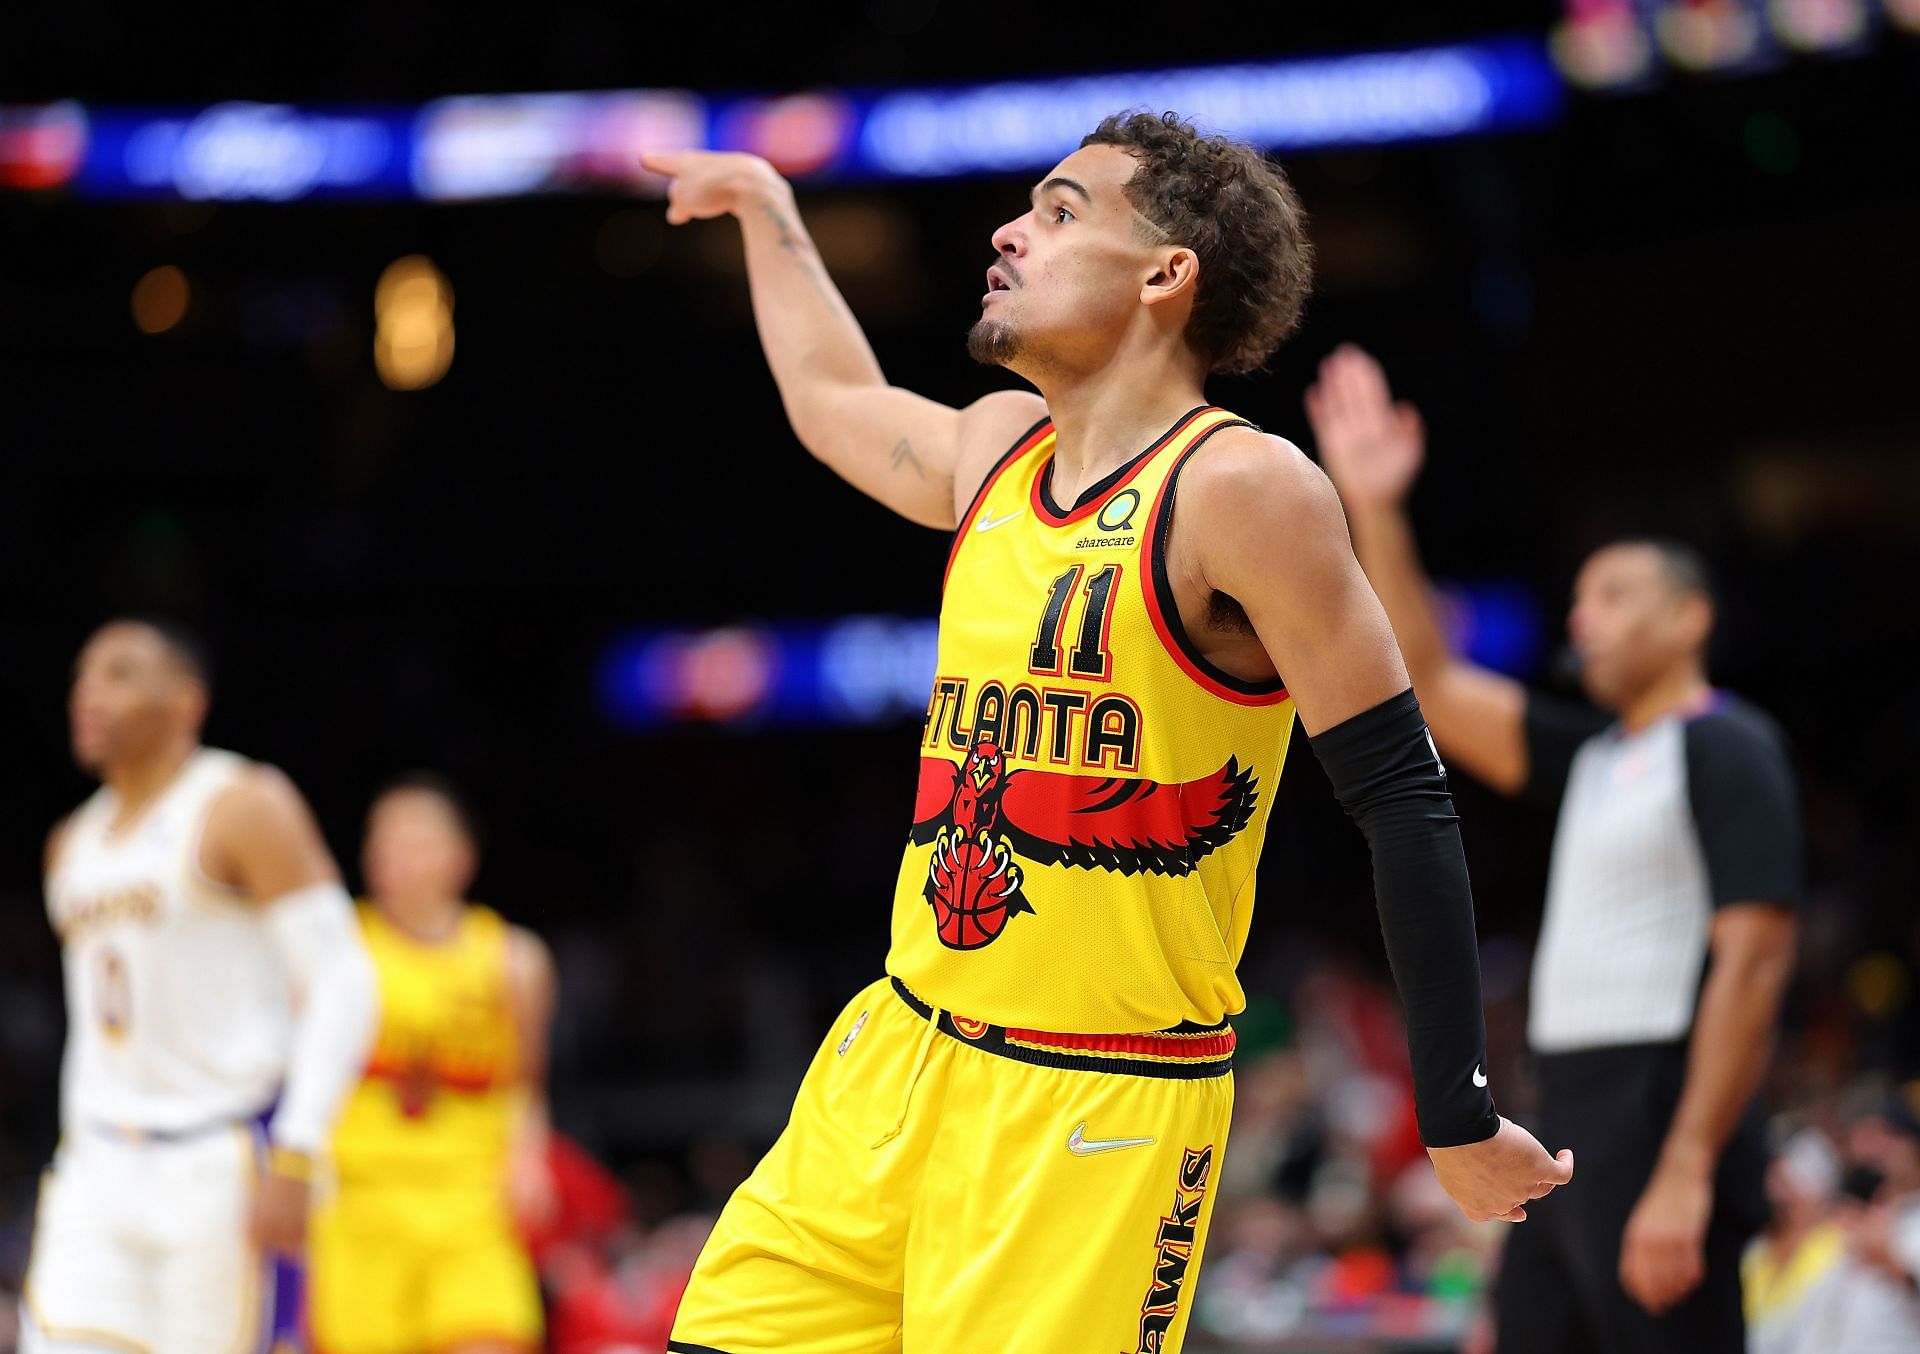 Trae Young #11 of the Atlanta Hawks reacts after shooting a three-point basket against the Los Angeles Lakers during the second half at State Farm Arena on January 30, 2022 in Atlanta, Georgia.